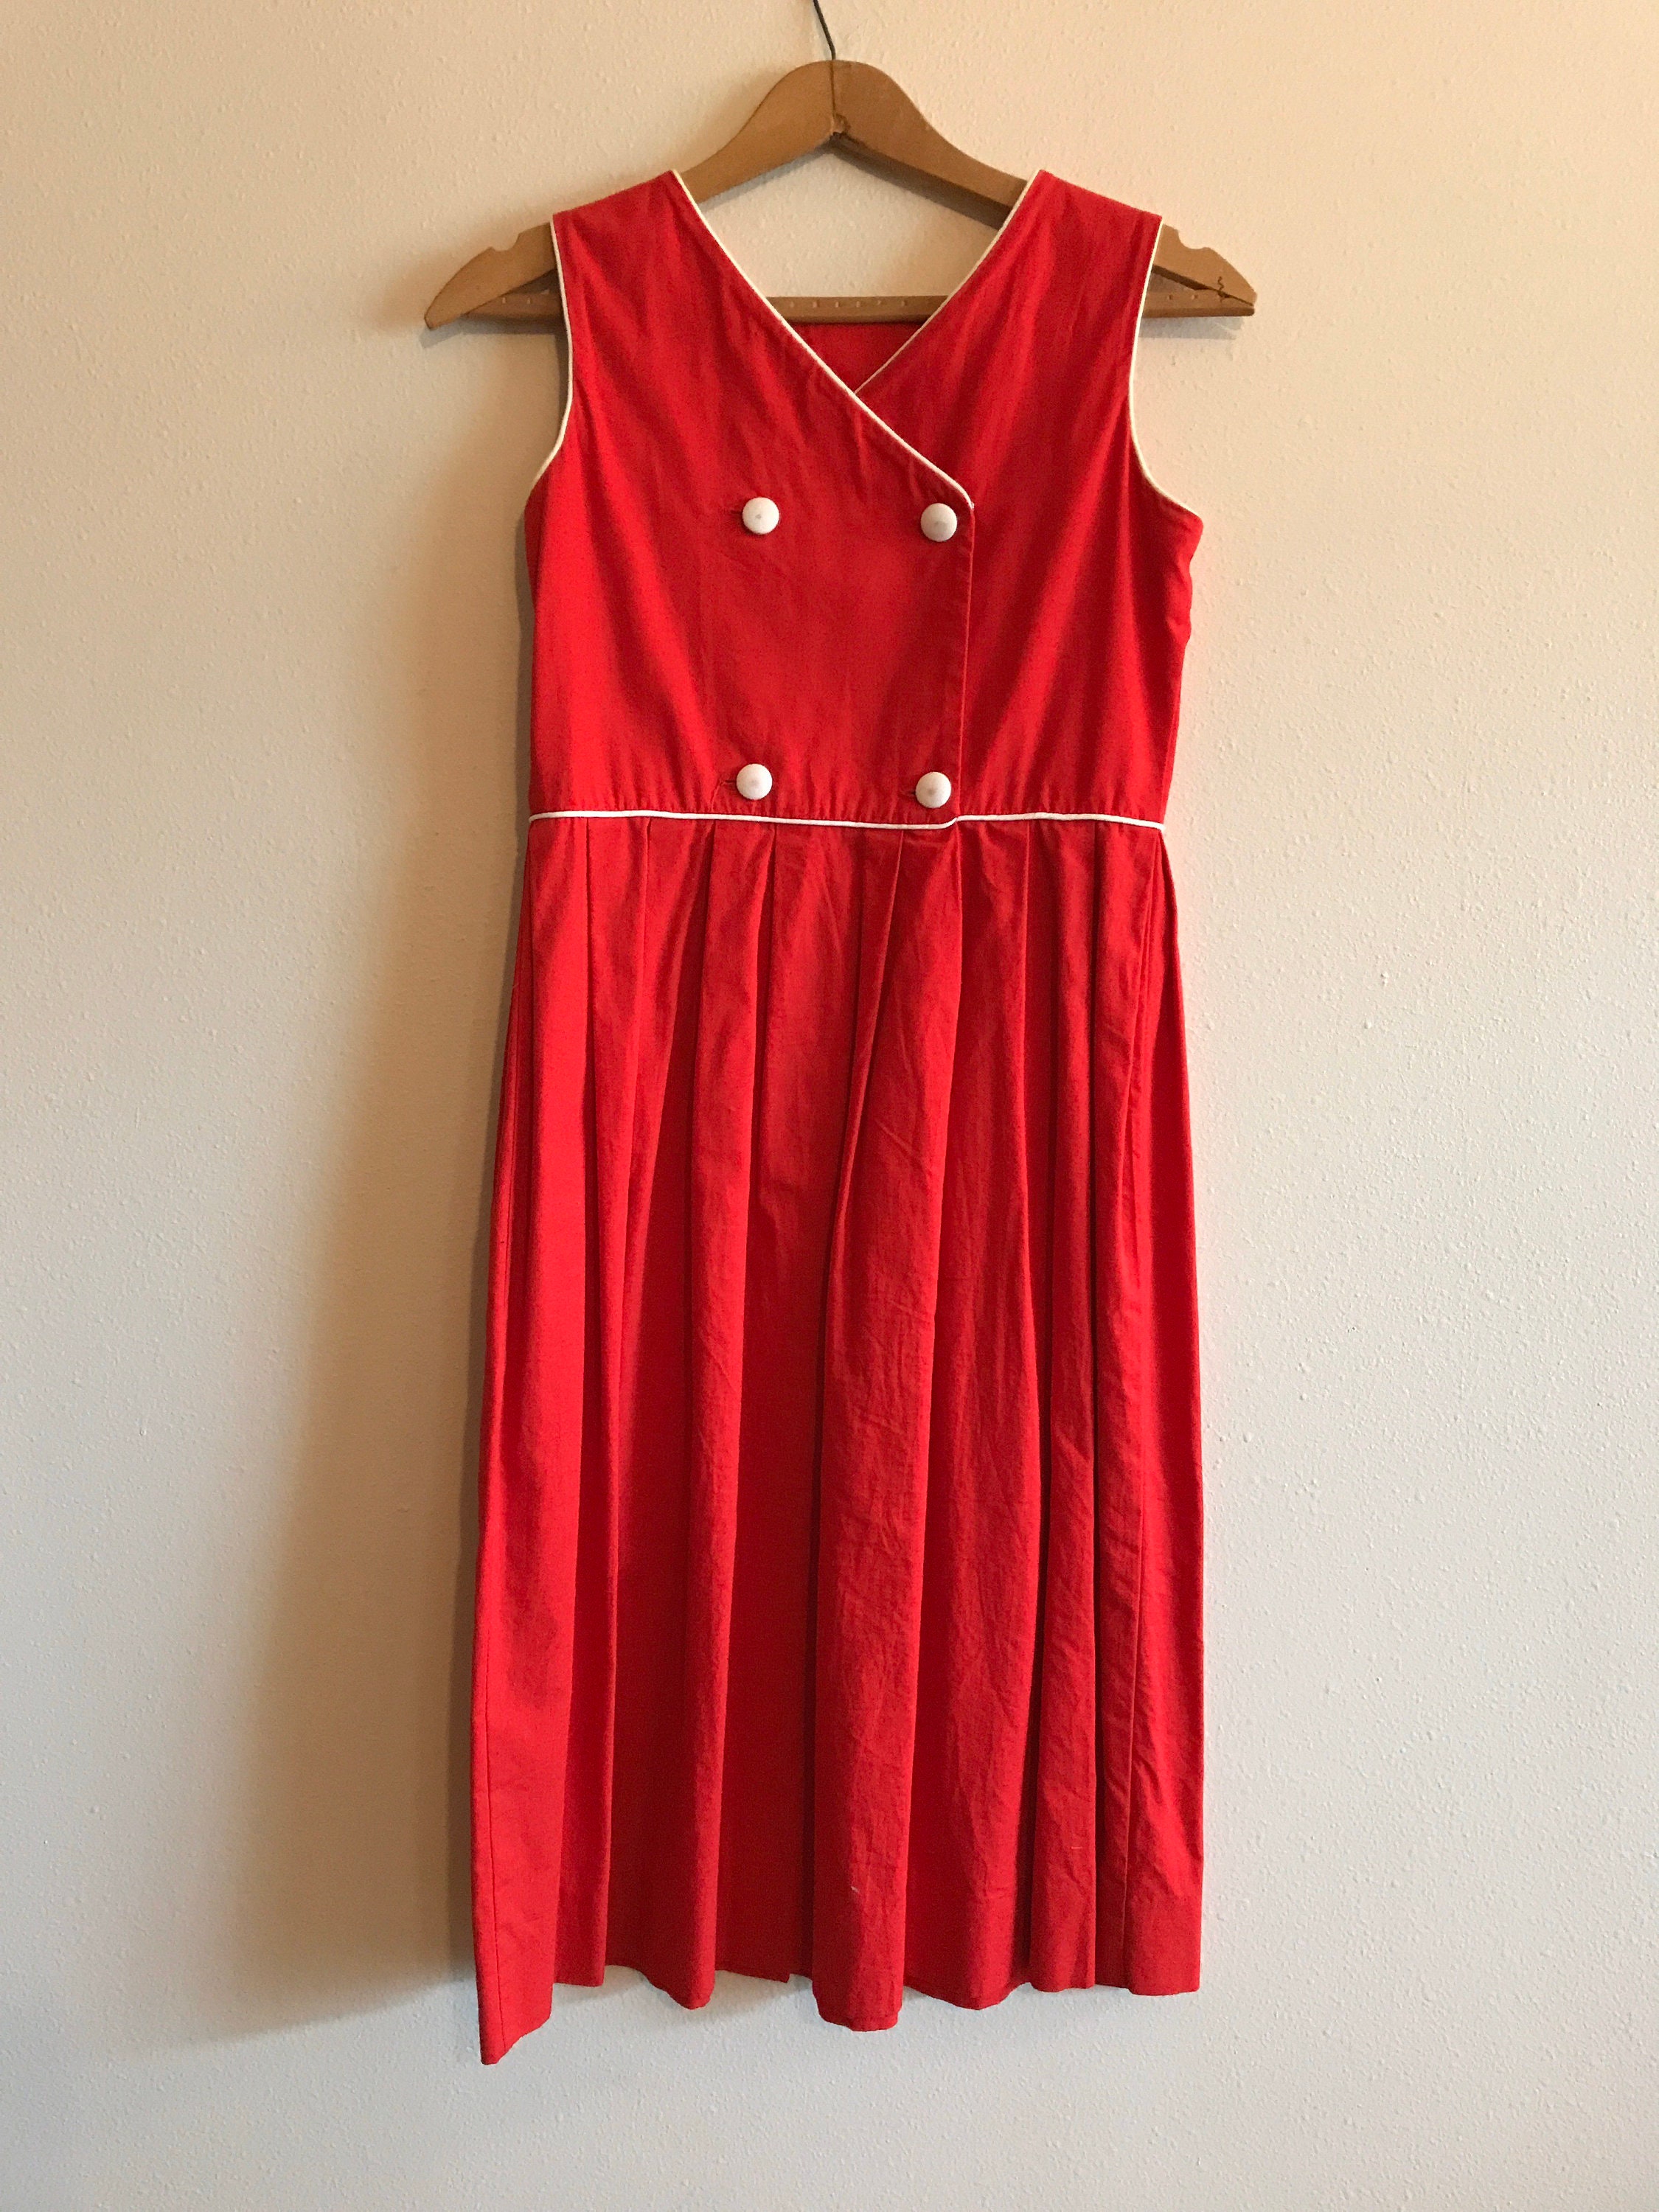 Maggie Breen Vintage Red Nautical Dress Girls Size 12 | Etsy